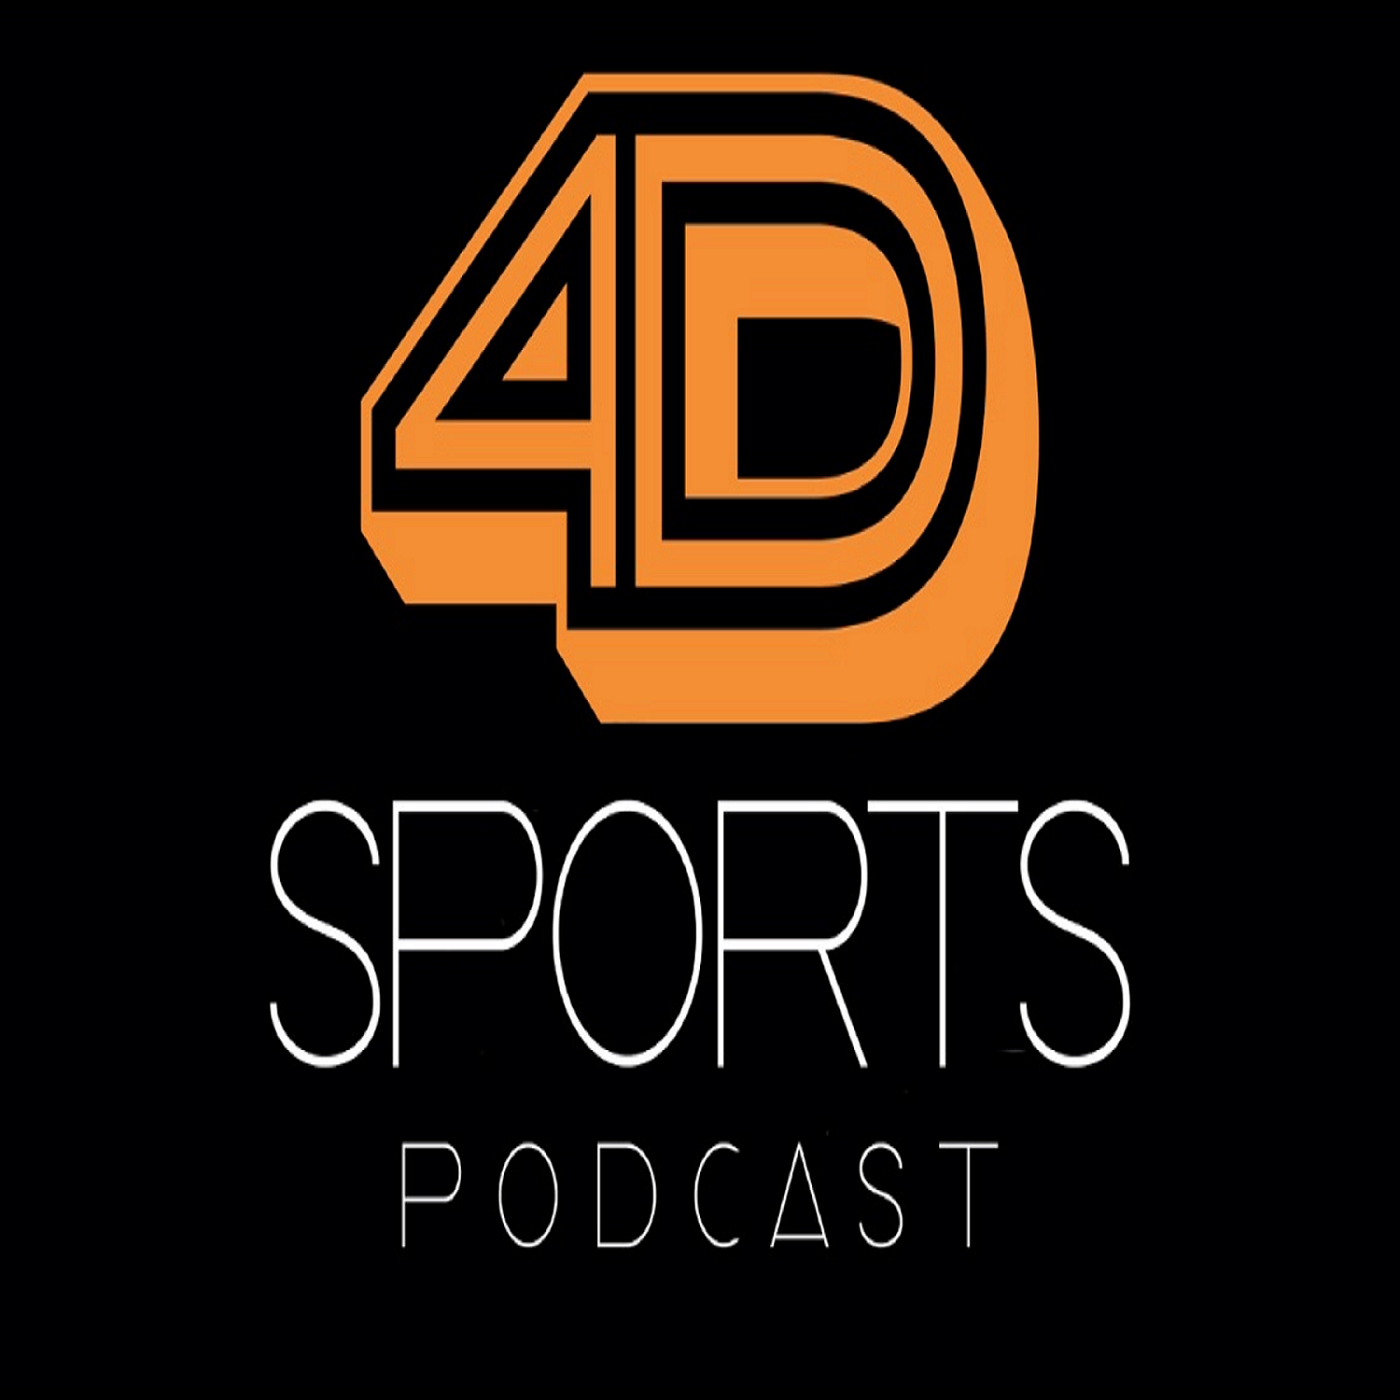 4D Sports Podcast